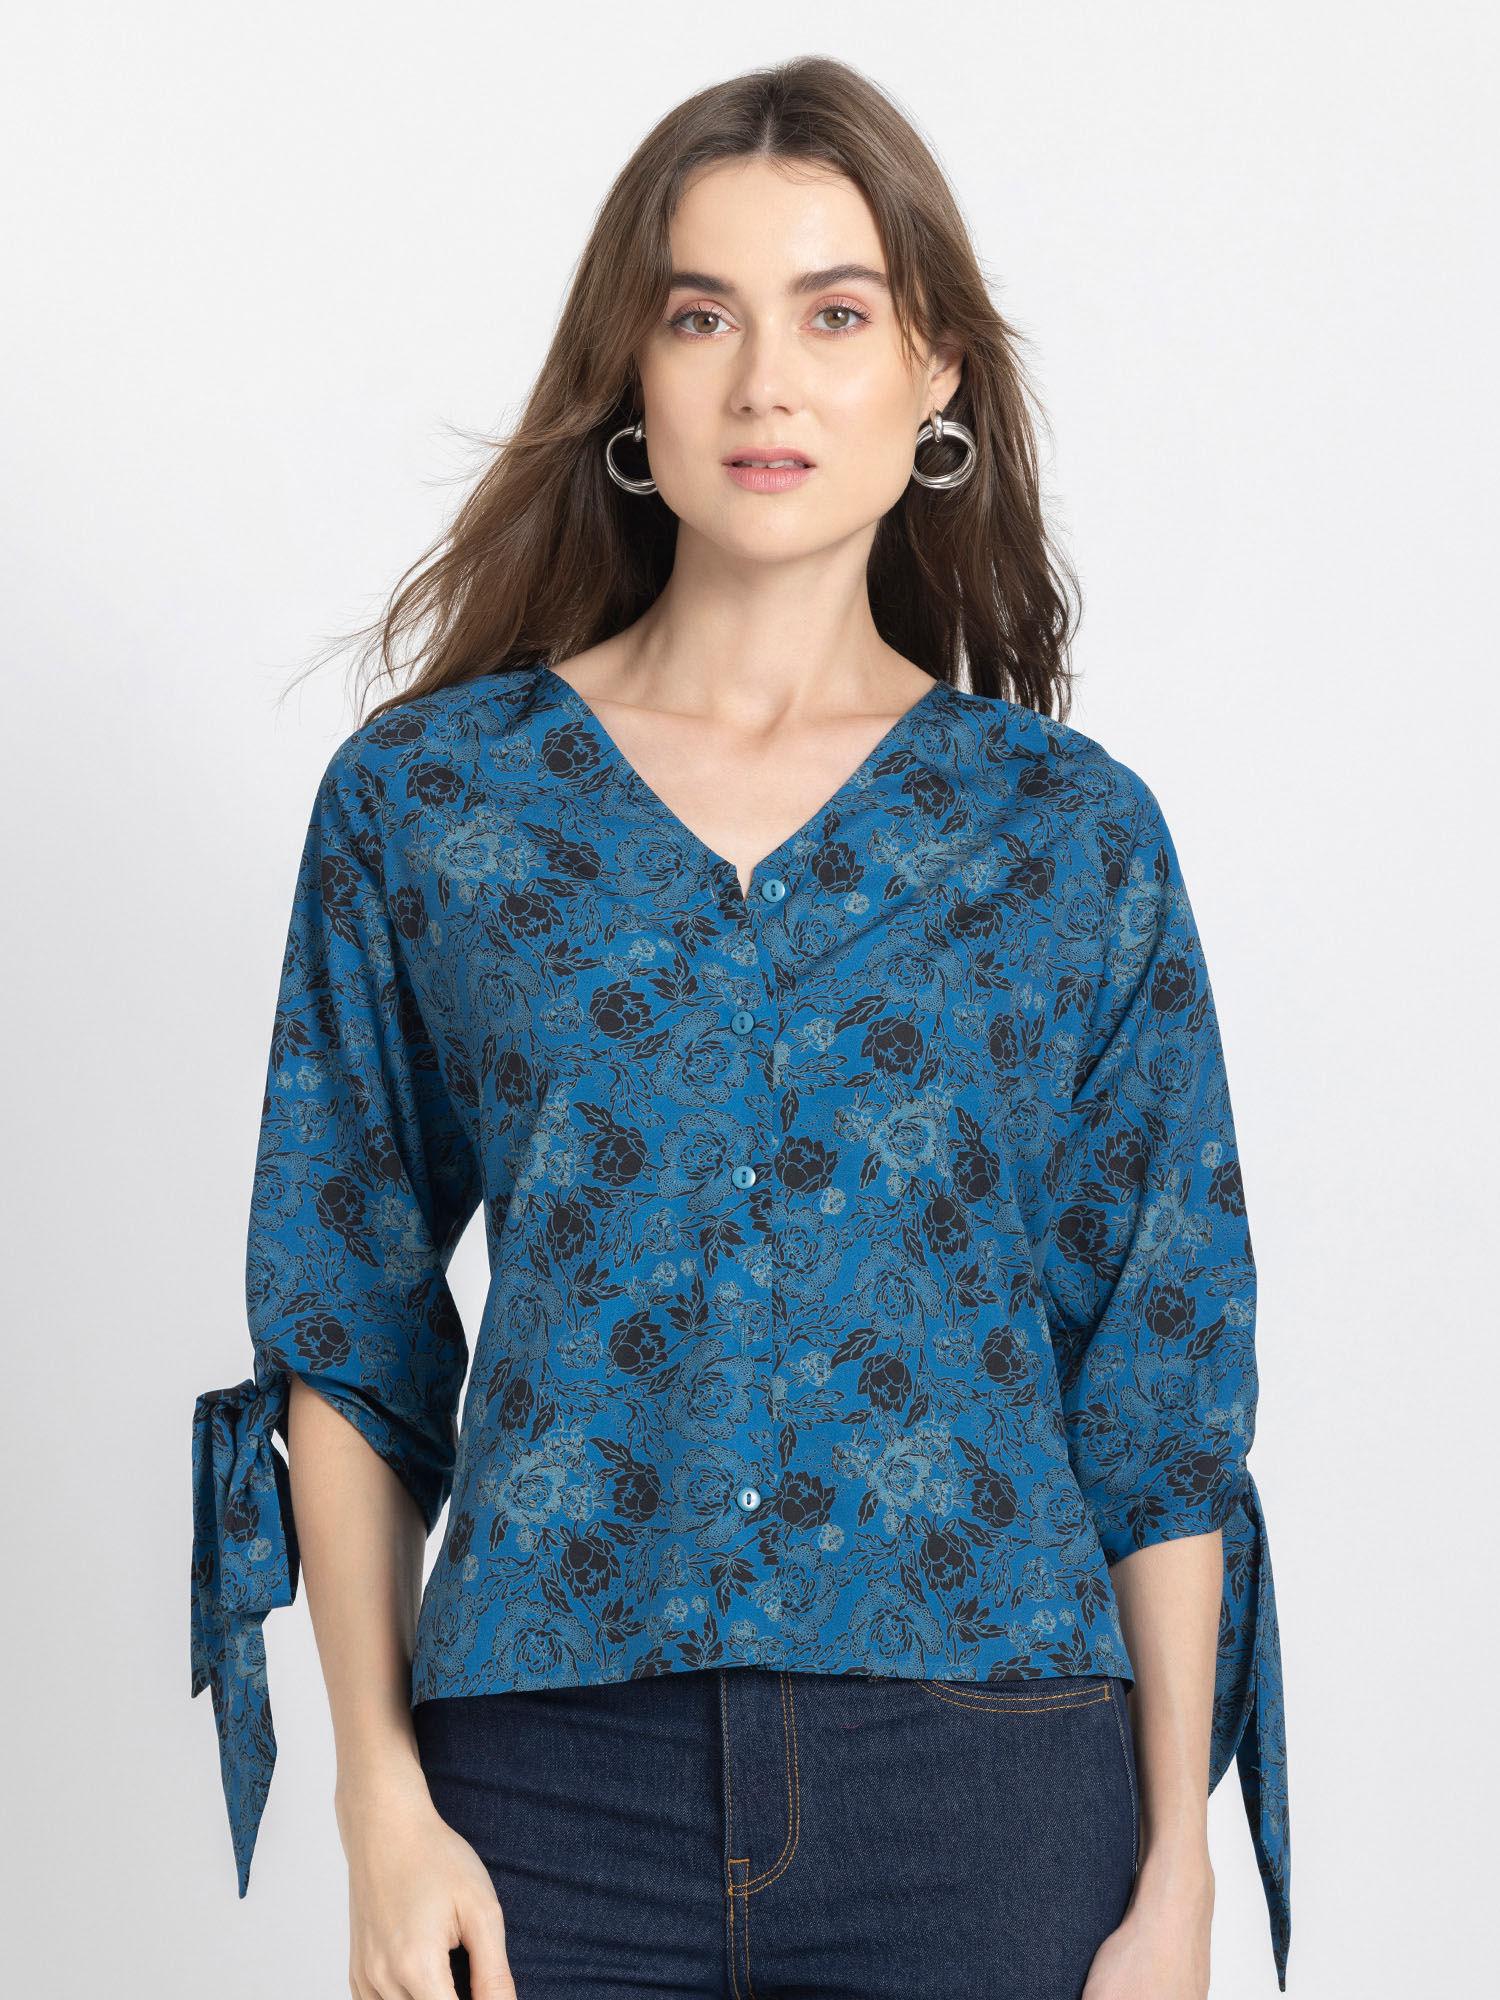 v-neck teal floral print short sleeves casual top for women